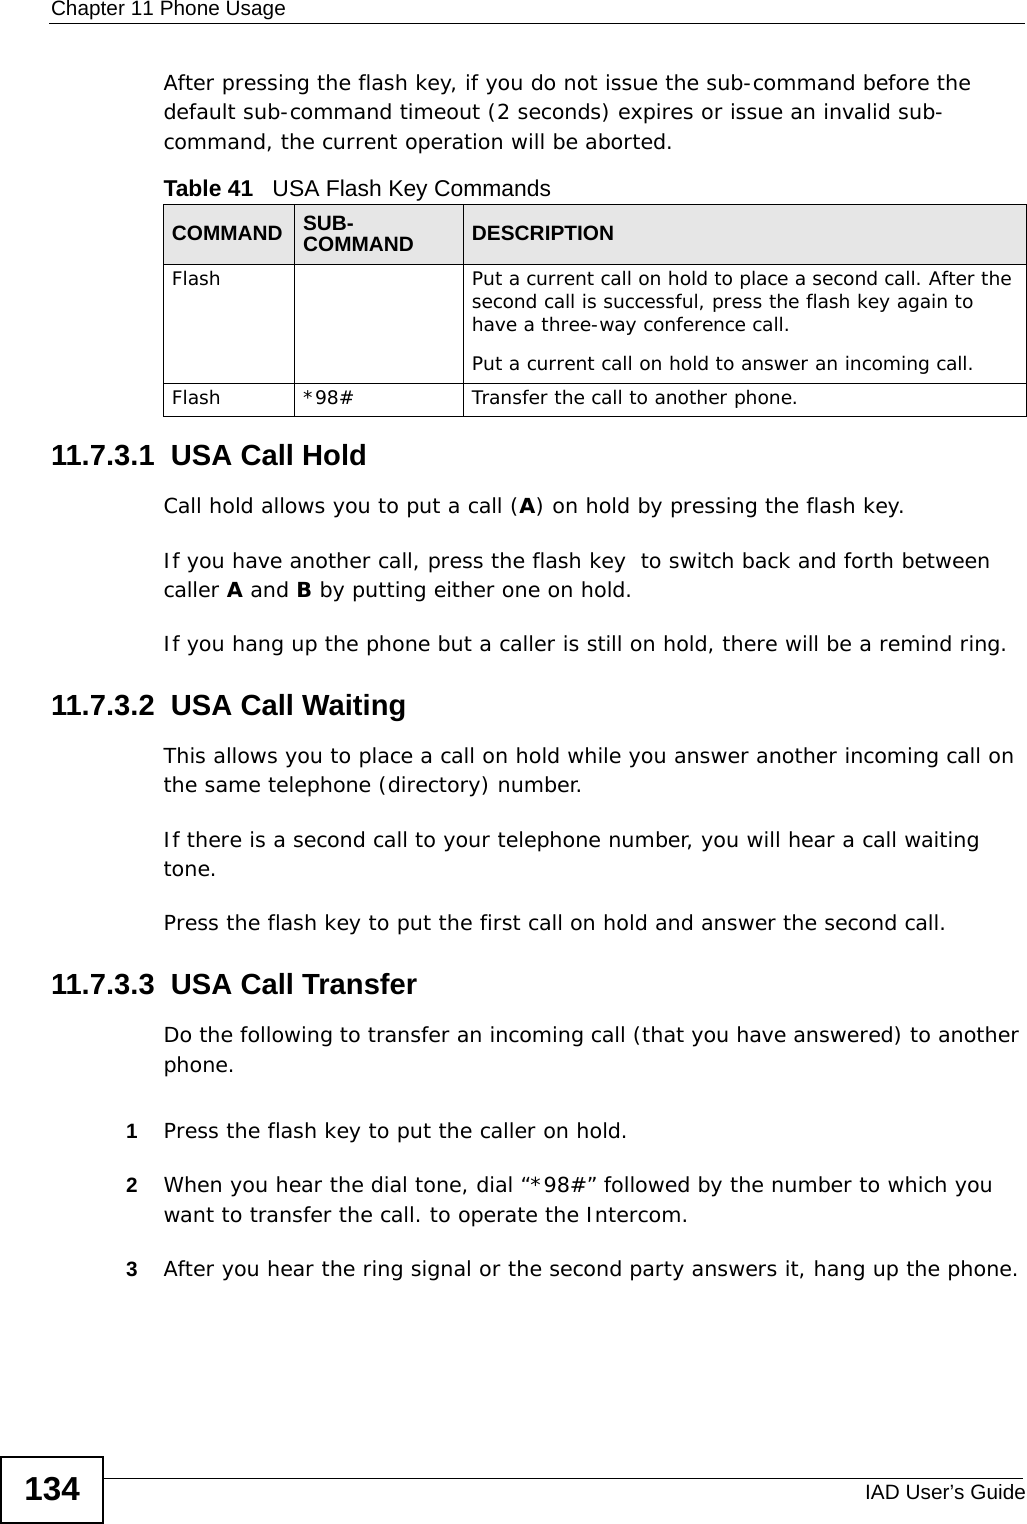 Chapter 11 Phone UsageIAD User’s Guide134After pressing the flash key, if you do not issue the sub-command before the default sub-command timeout (2 seconds) expires or issue an invalid sub-command, the current operation will be aborted.11.7.3.1  USA Call HoldCall hold allows you to put a call (A) on hold by pressing the flash key. If you have another call, press the flash key  to switch back and forth between caller A and B by putting either one on hold.If you hang up the phone but a caller is still on hold, there will be a remind ring.11.7.3.2  USA Call Waiting This allows you to place a call on hold while you answer another incoming call on the same telephone (directory) number. If there is a second call to your telephone number, you will hear a call waiting tone. Press the flash key to put the first call on hold and answer the second call.11.7.3.3  USA Call TransferDo the following to transfer an incoming call (that you have answered) to another phone.1Press the flash key to put the caller on hold.2When you hear the dial tone, dial “*98#” followed by the number to which you want to transfer the call. to operate the Intercom.3After you hear the ring signal or the second party answers it, hang up the phone.Table 41   USA Flash Key CommandsCOMMAND SUB-COMMAND DESCRIPTIONFlash  Put a current call on hold to place a second call. After the second call is successful, press the flash key again to have a three-way conference call.Put a current call on hold to answer an incoming call.Flash  *98# Transfer the call to another phone.